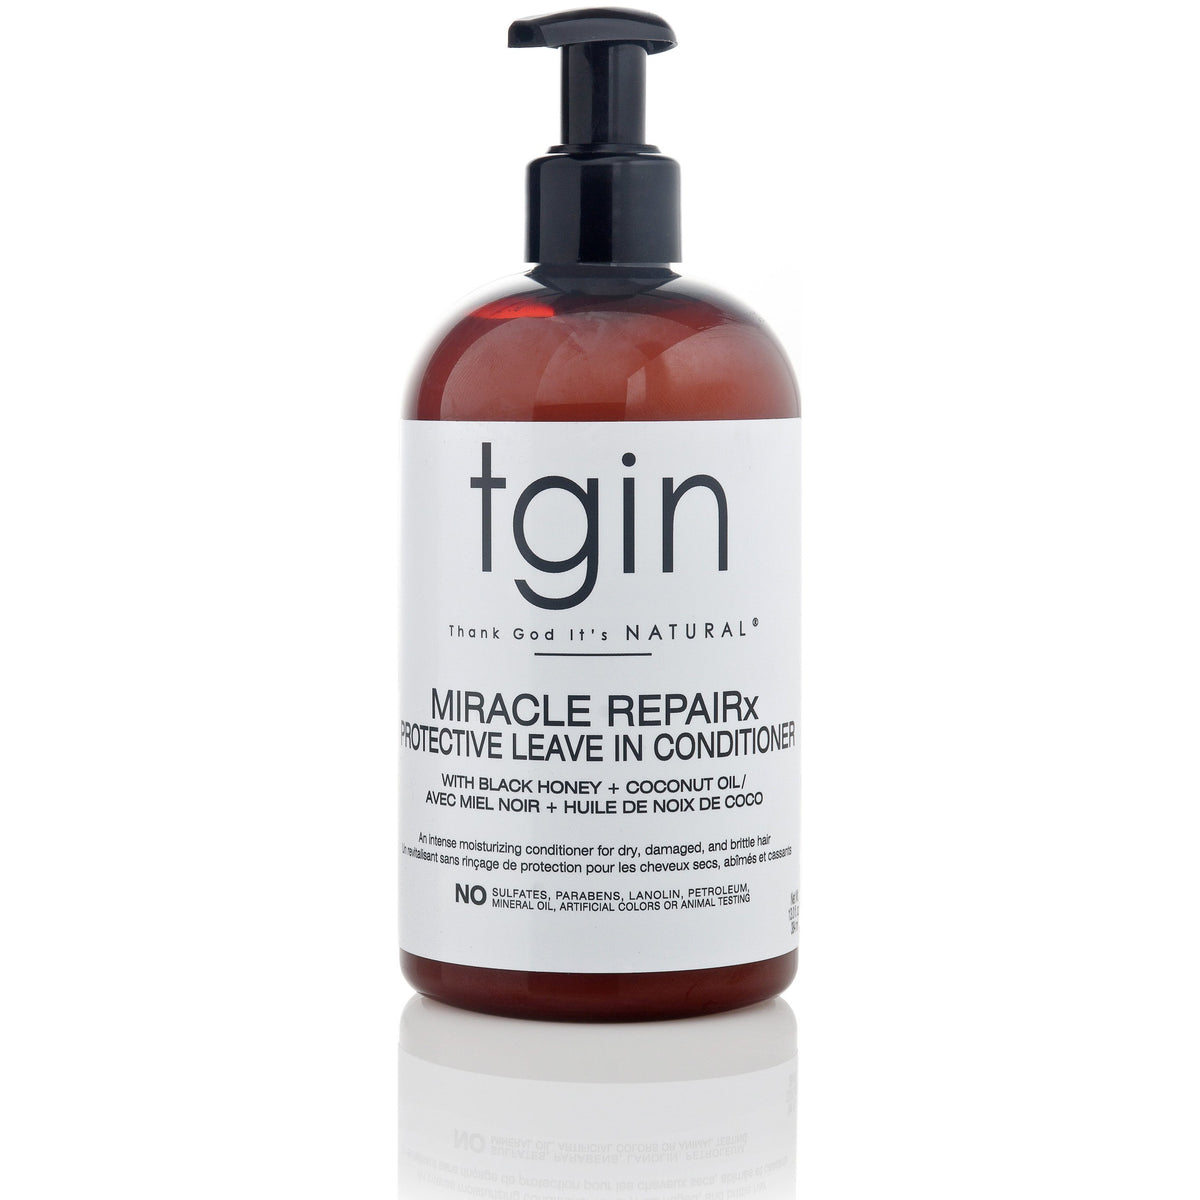 TGIN - Miracle RepaiRx Protective Leave in Conditioner (Après-shampoing sans rinçage)